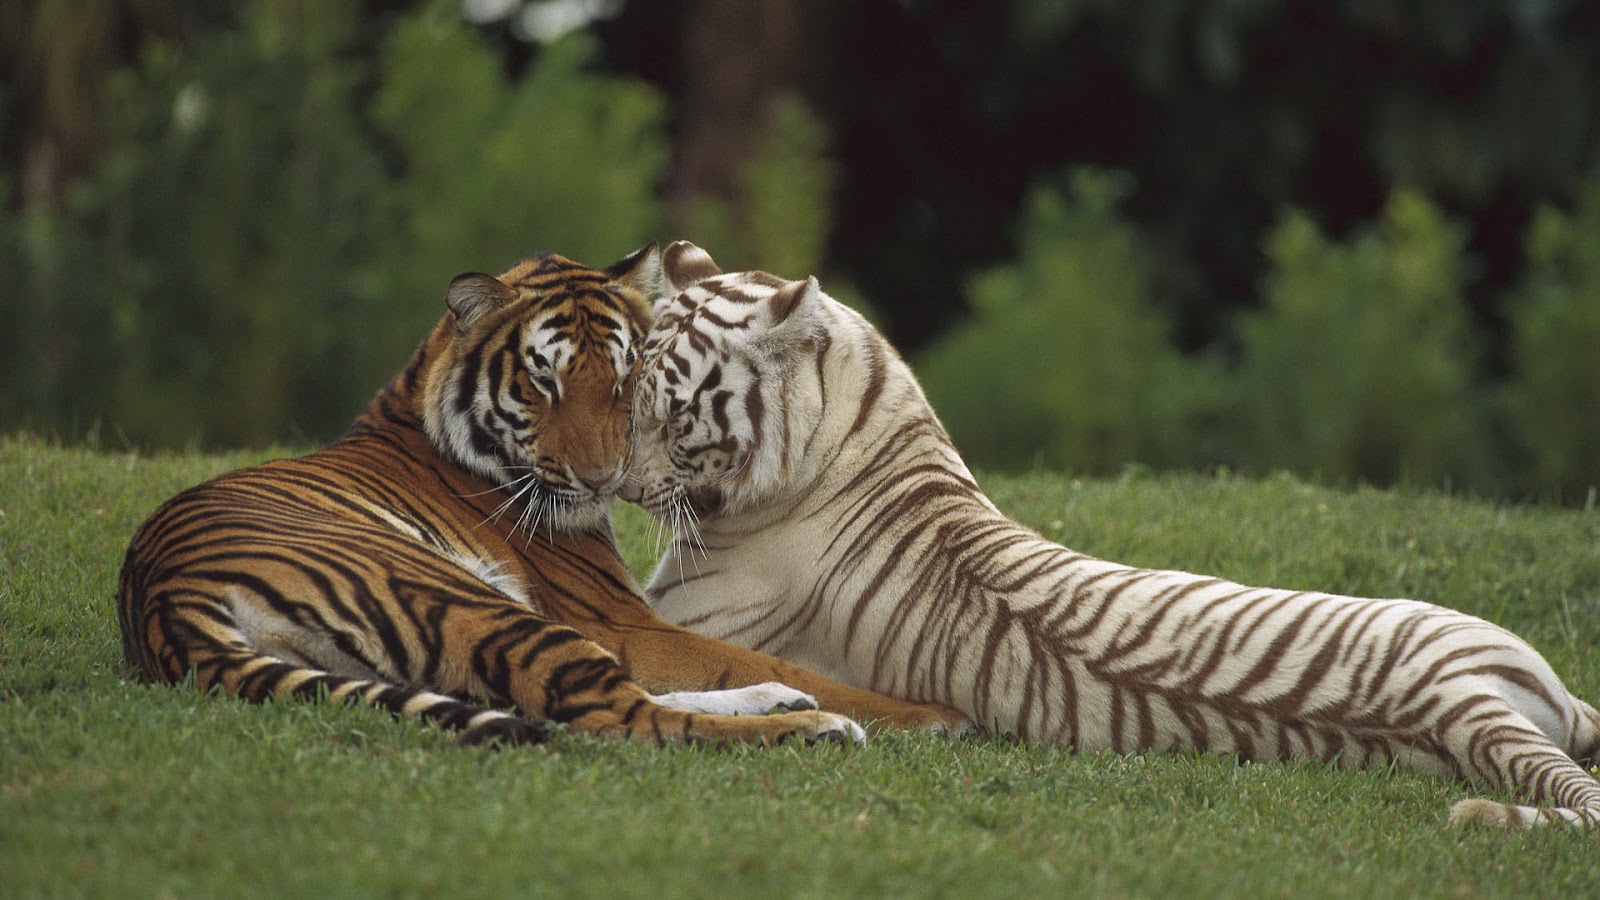 HD Tigers Wallpaper And Photos Animals